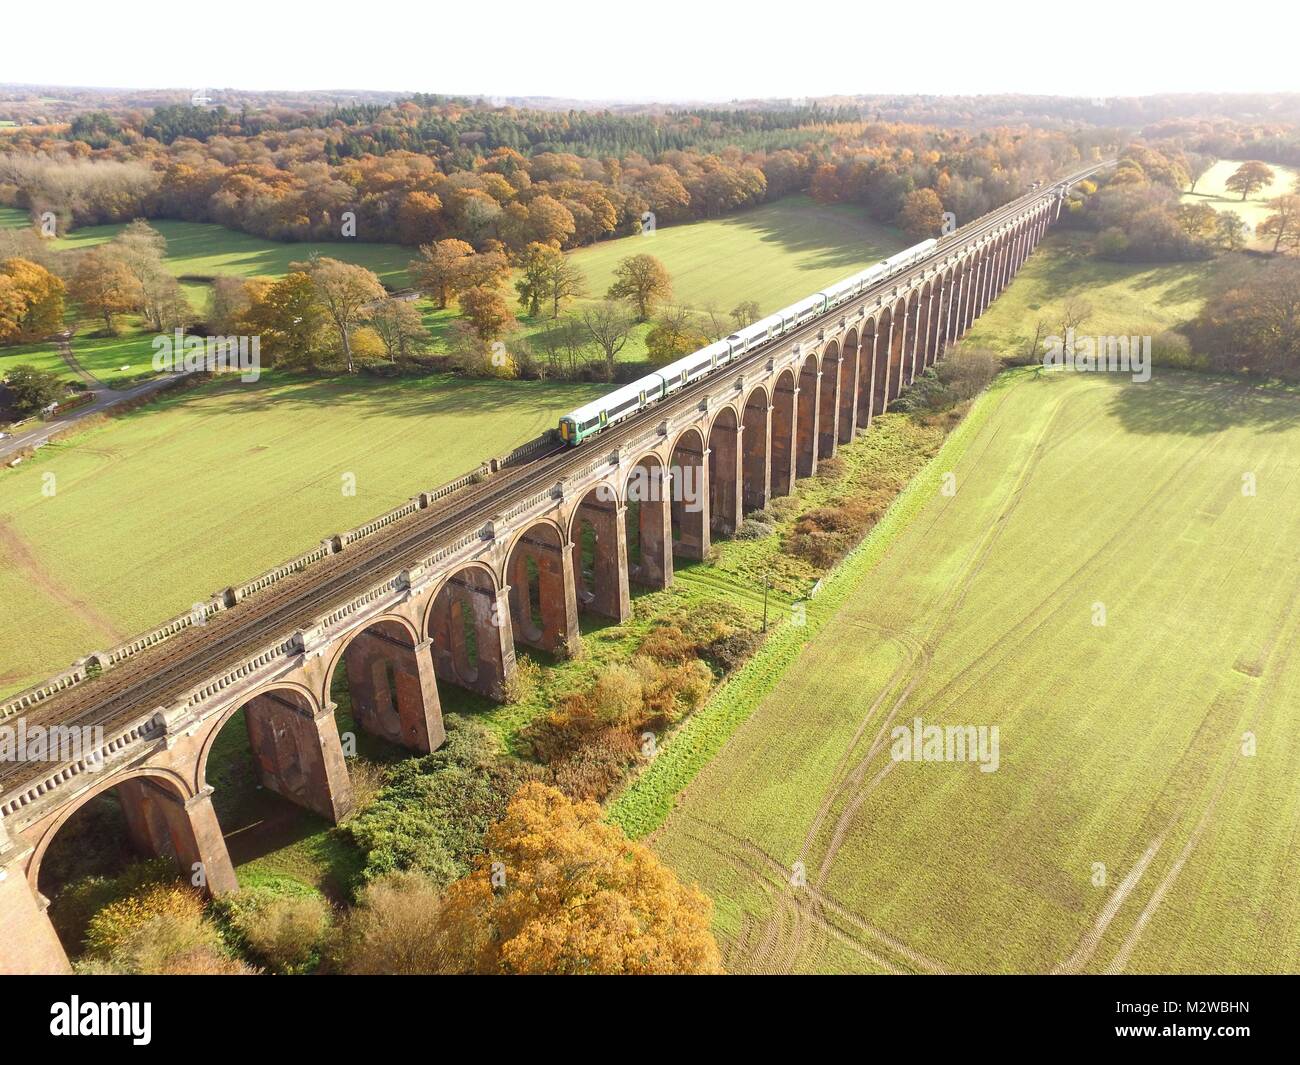 Ouse Valley Viaduct in West Sussex, England. Built in 1841 and with a length of 1475ft it used over 11 million bricks In its construction. Stock Photo